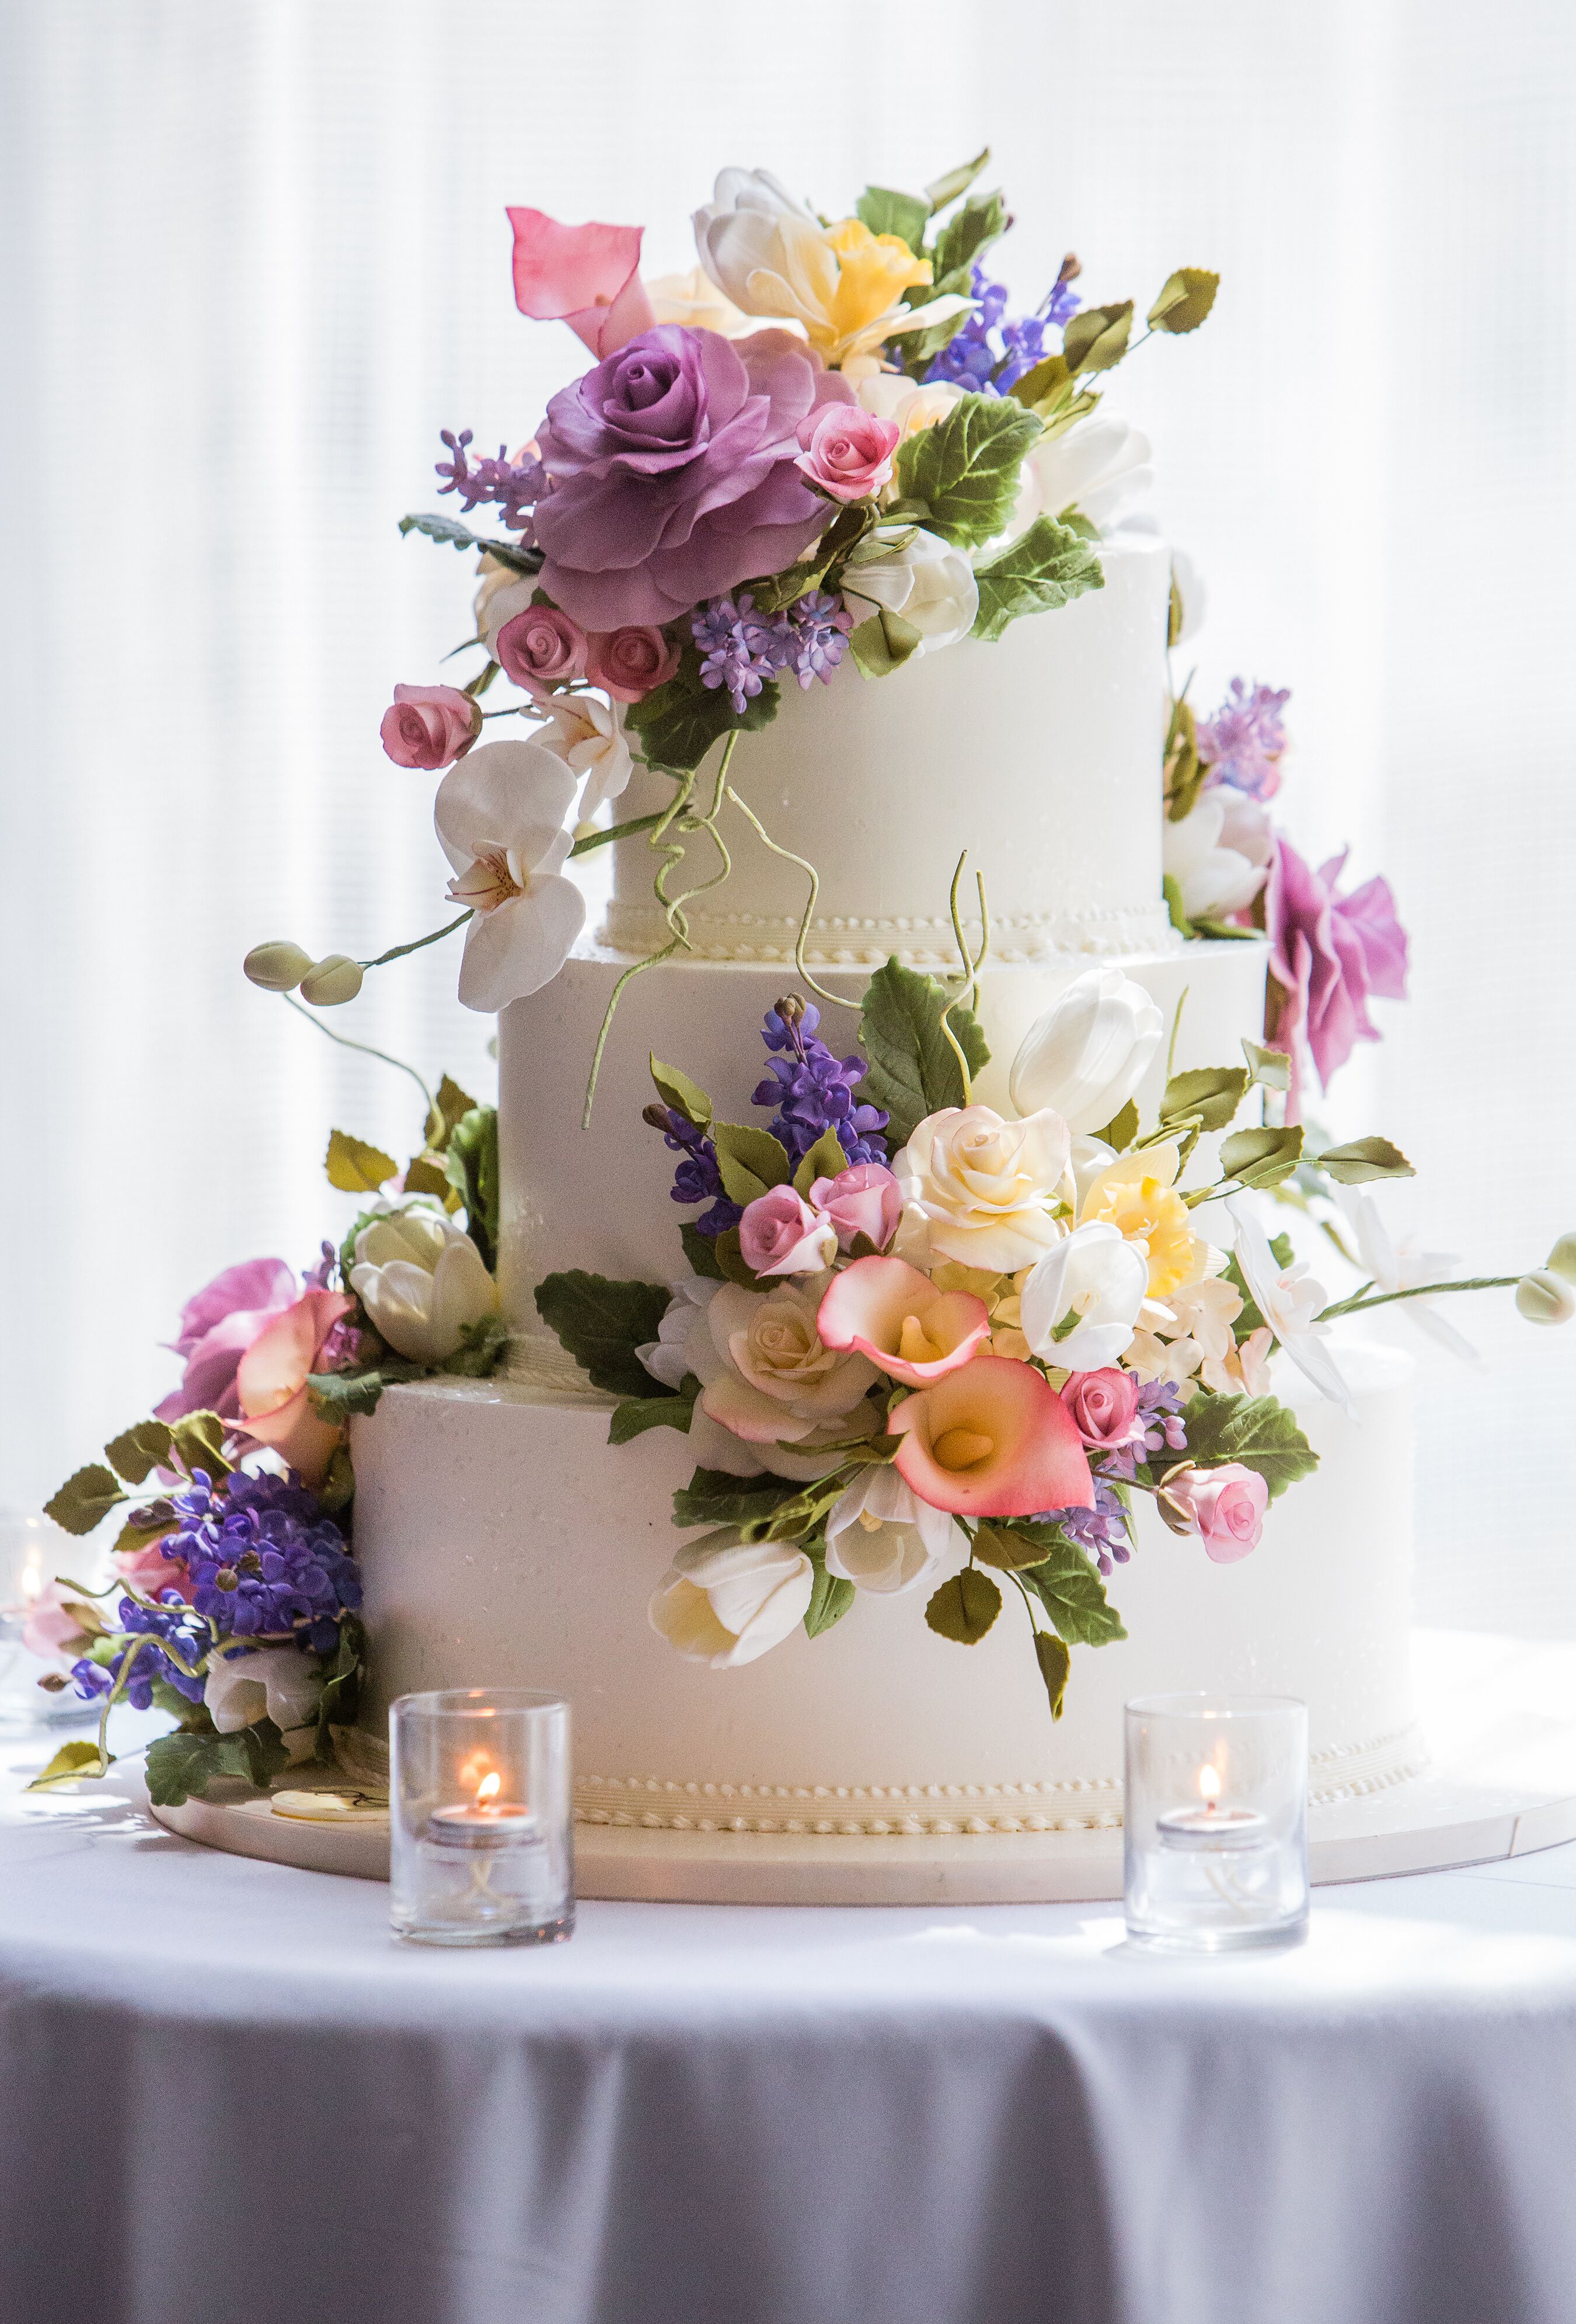 Sugar Roses Peonies and Orchid Wedding Cake Decor